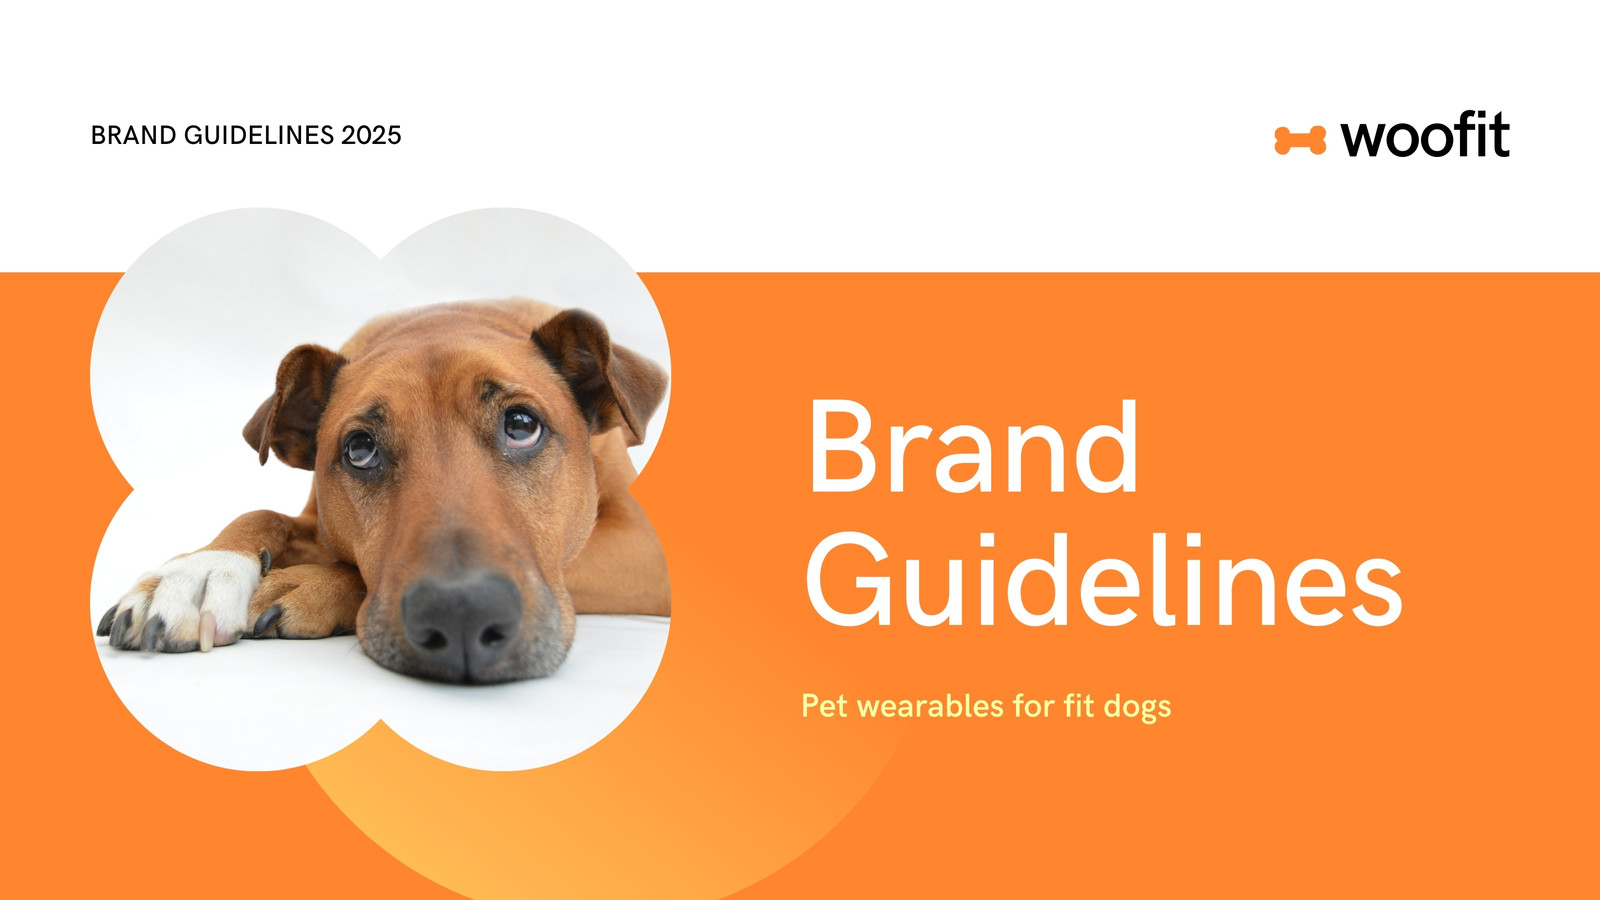 Page 4 - Free customizable brand guidelines presentation templates | Canva